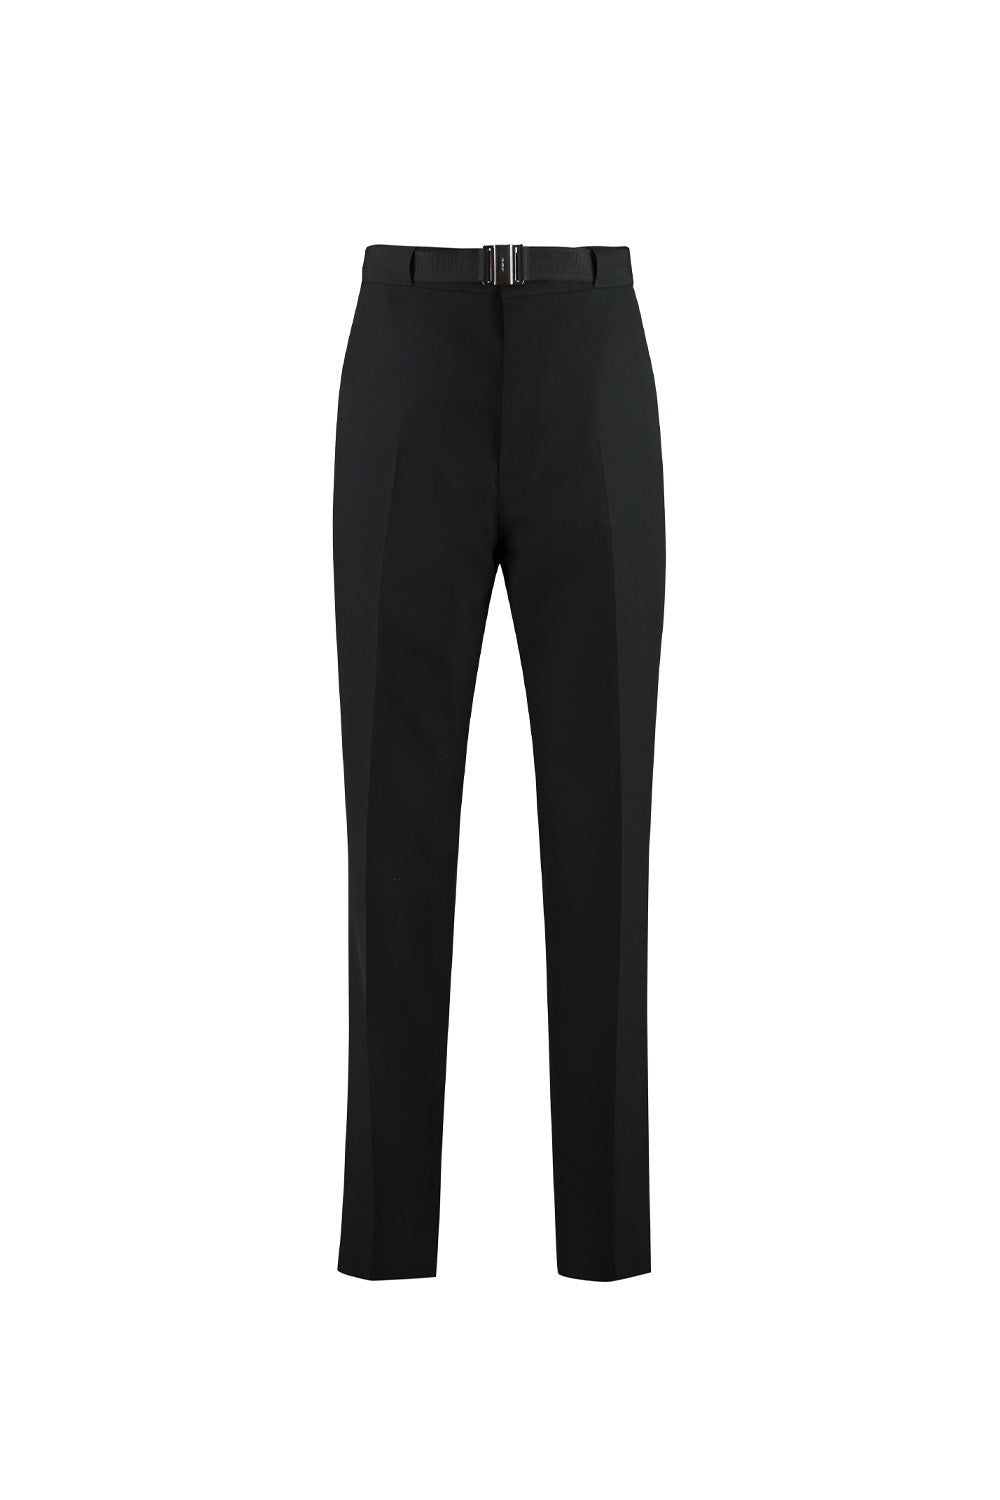 Givenchy Trousers pants